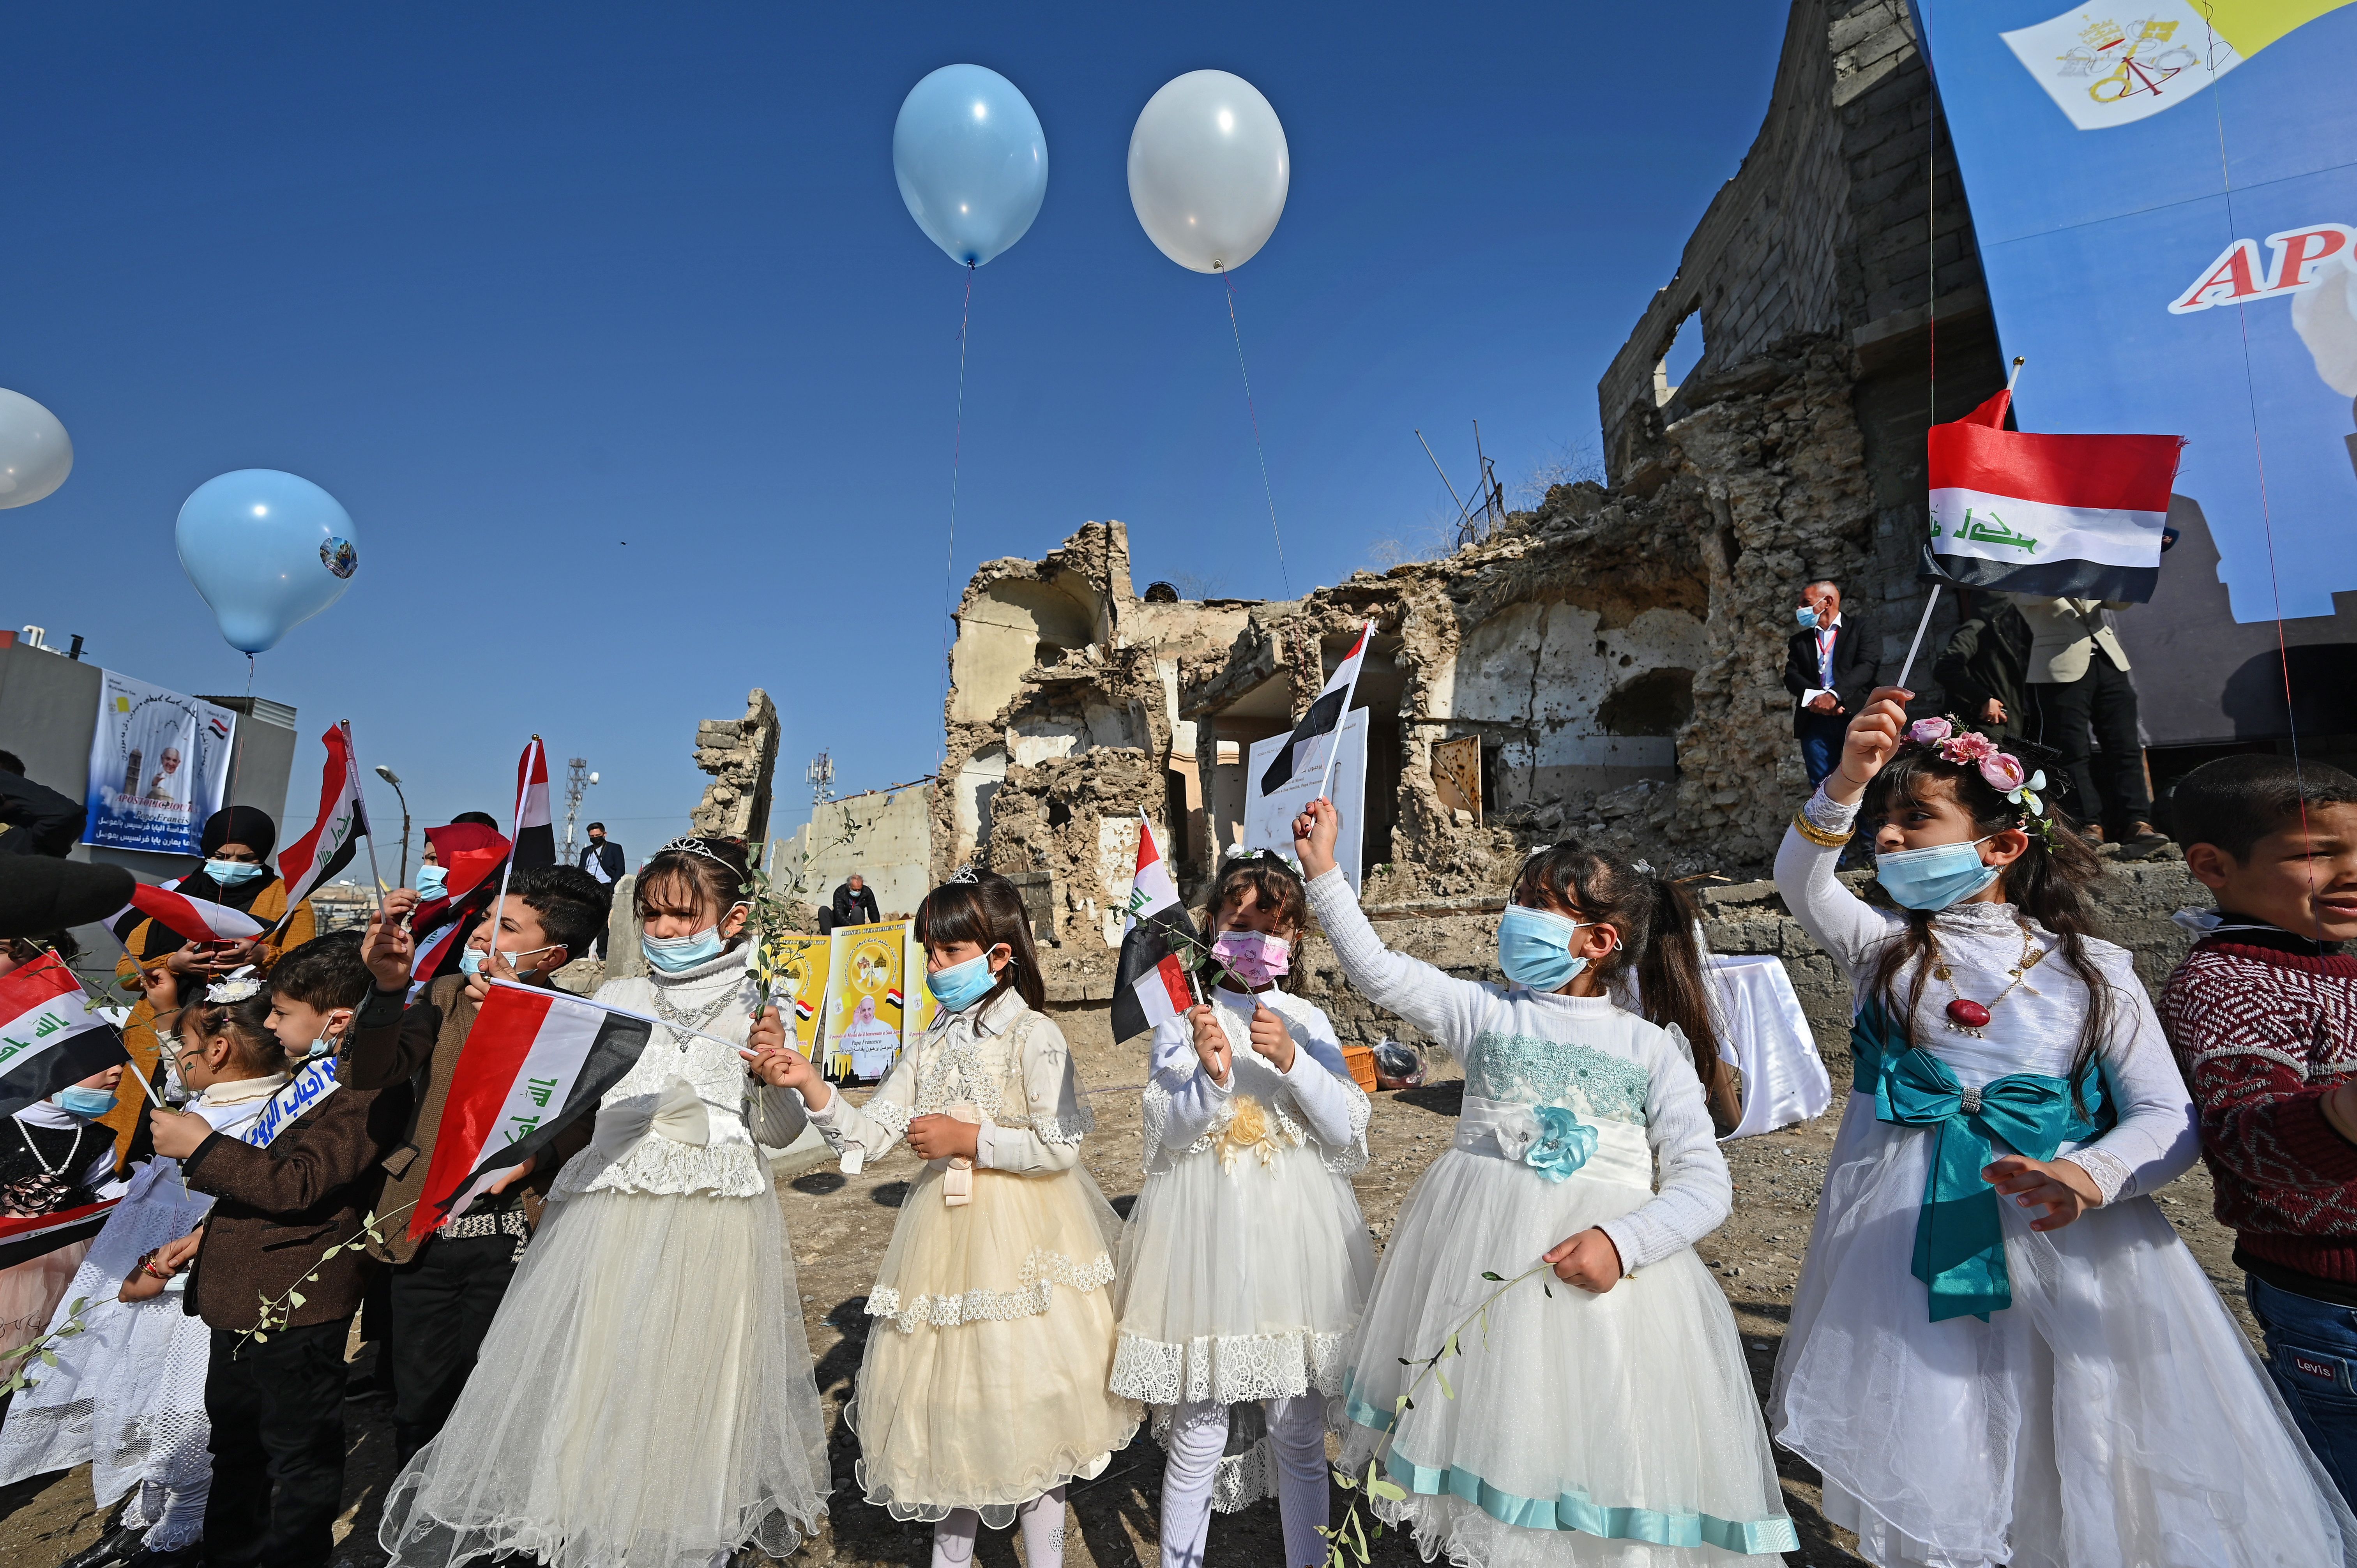 Iraqi children dressed in costumes wave national flags near the ruins of the Syriac Catholic Church of the Immaculate Conception, ahead of the Pope’s visit